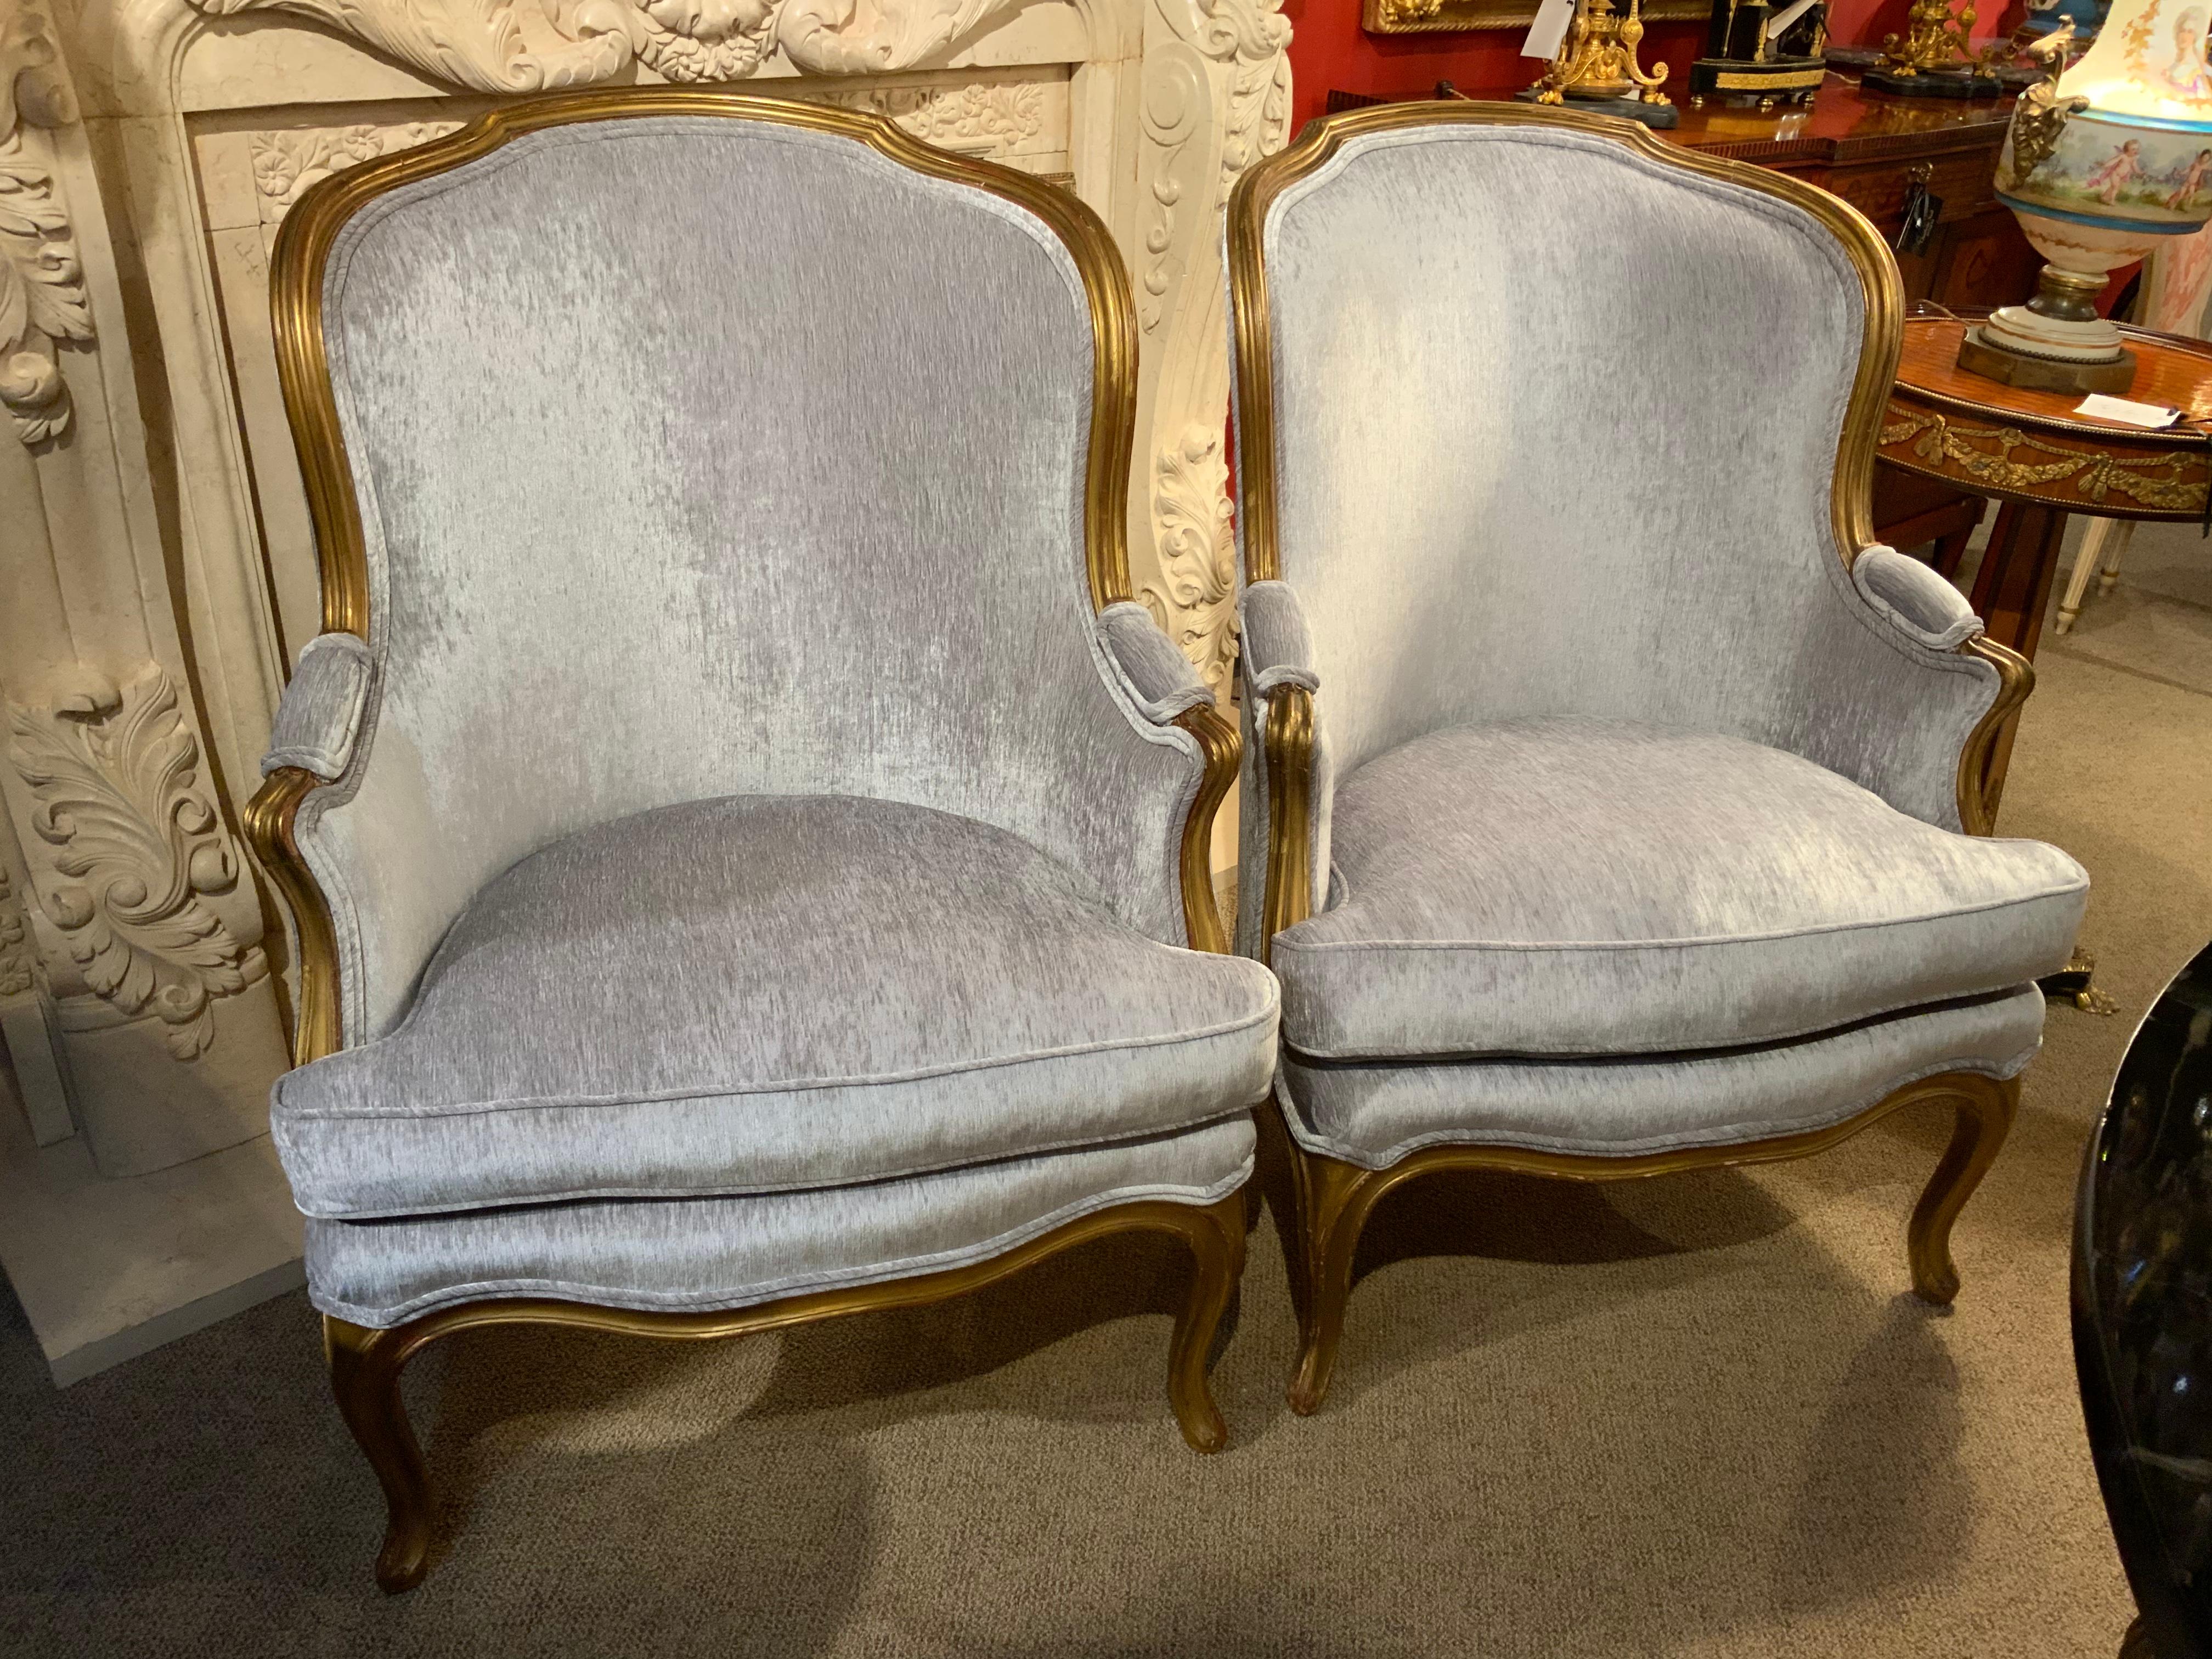 The curved back design of these chairs make them desirable 
Because they are not only a beautiful design but they are
Comfortable. The giltwood is in antique gilt finish with a light
Red hue under glow. They have been re-upholstered in a